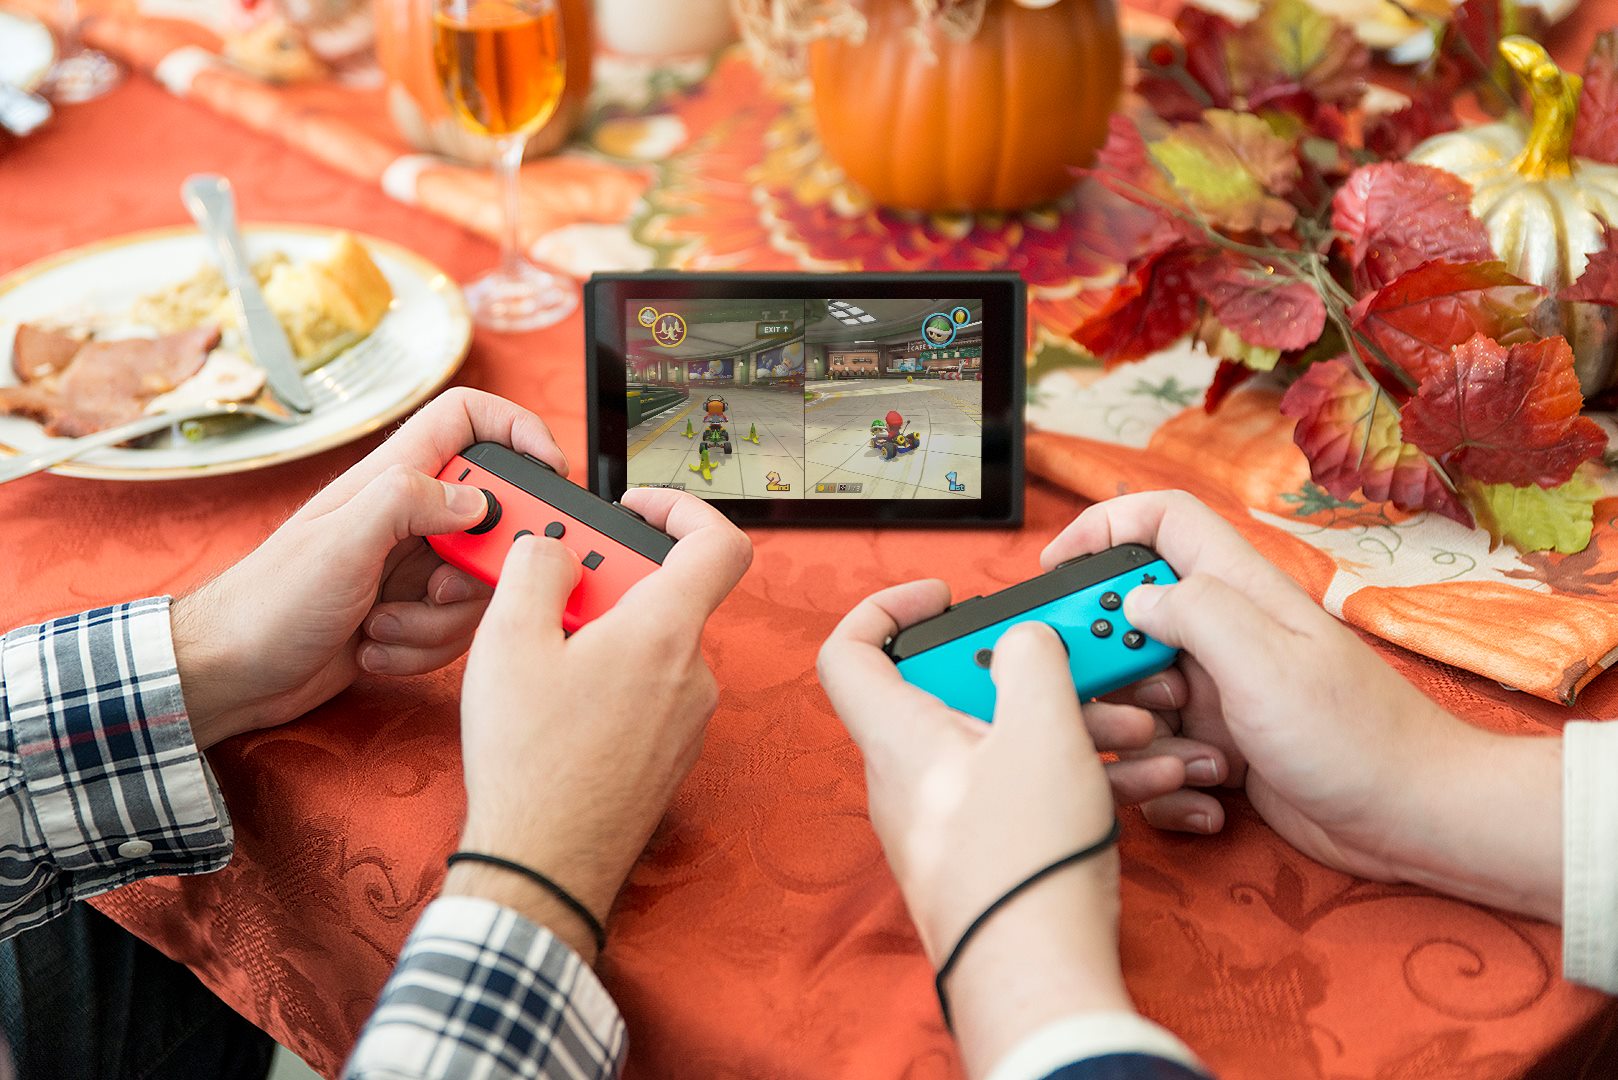 Nintendo content propels Switch to become third best-selling